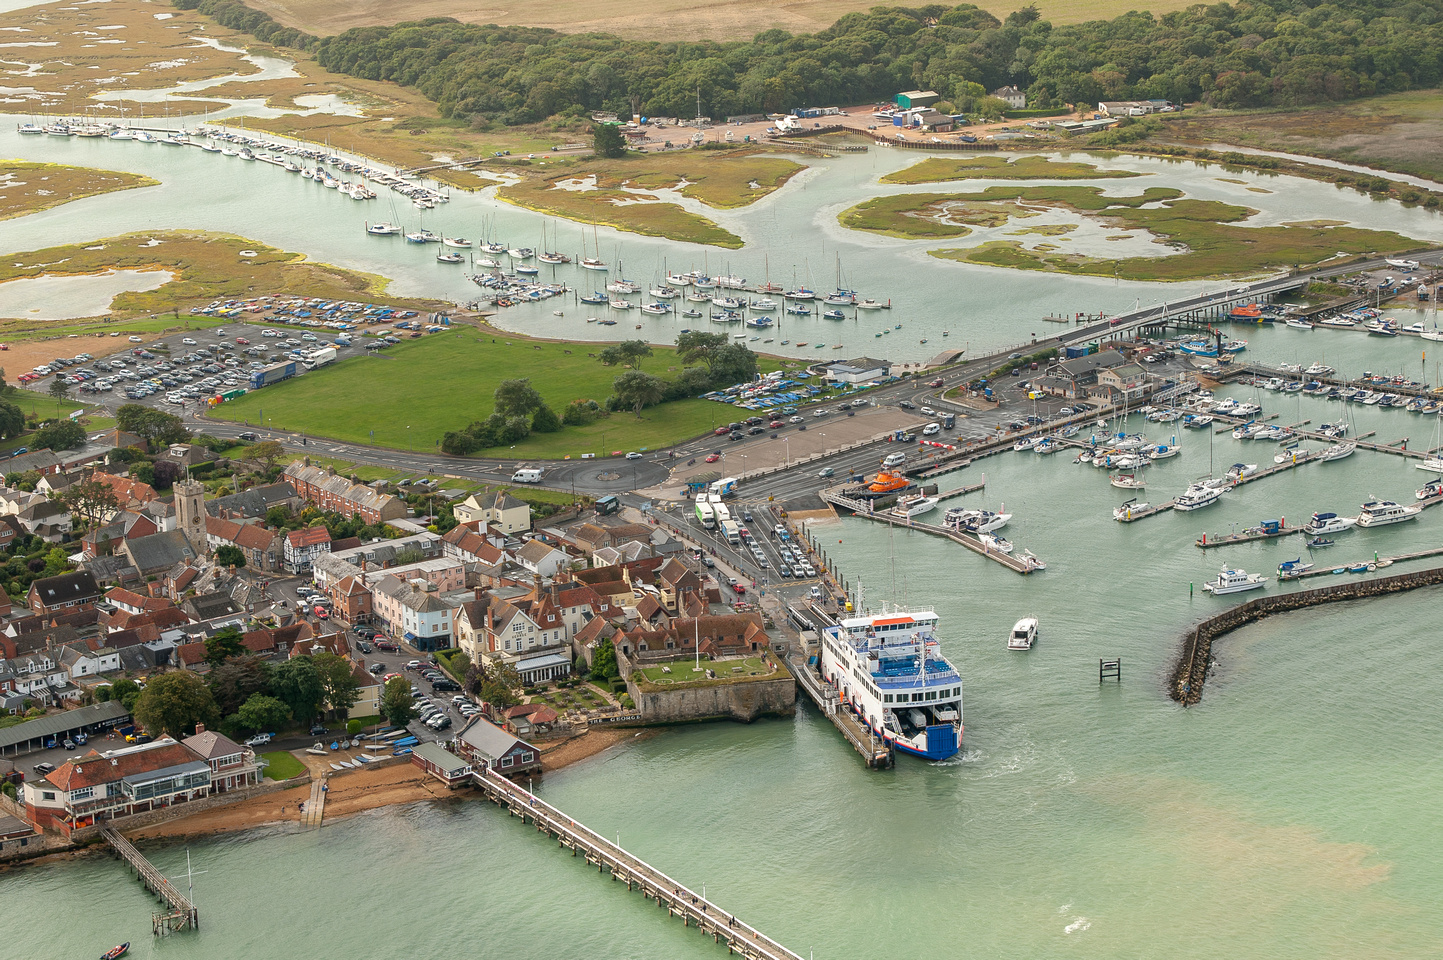 An aerial view of Wightlink's ferry port in Yarmouth, Isle of Wight